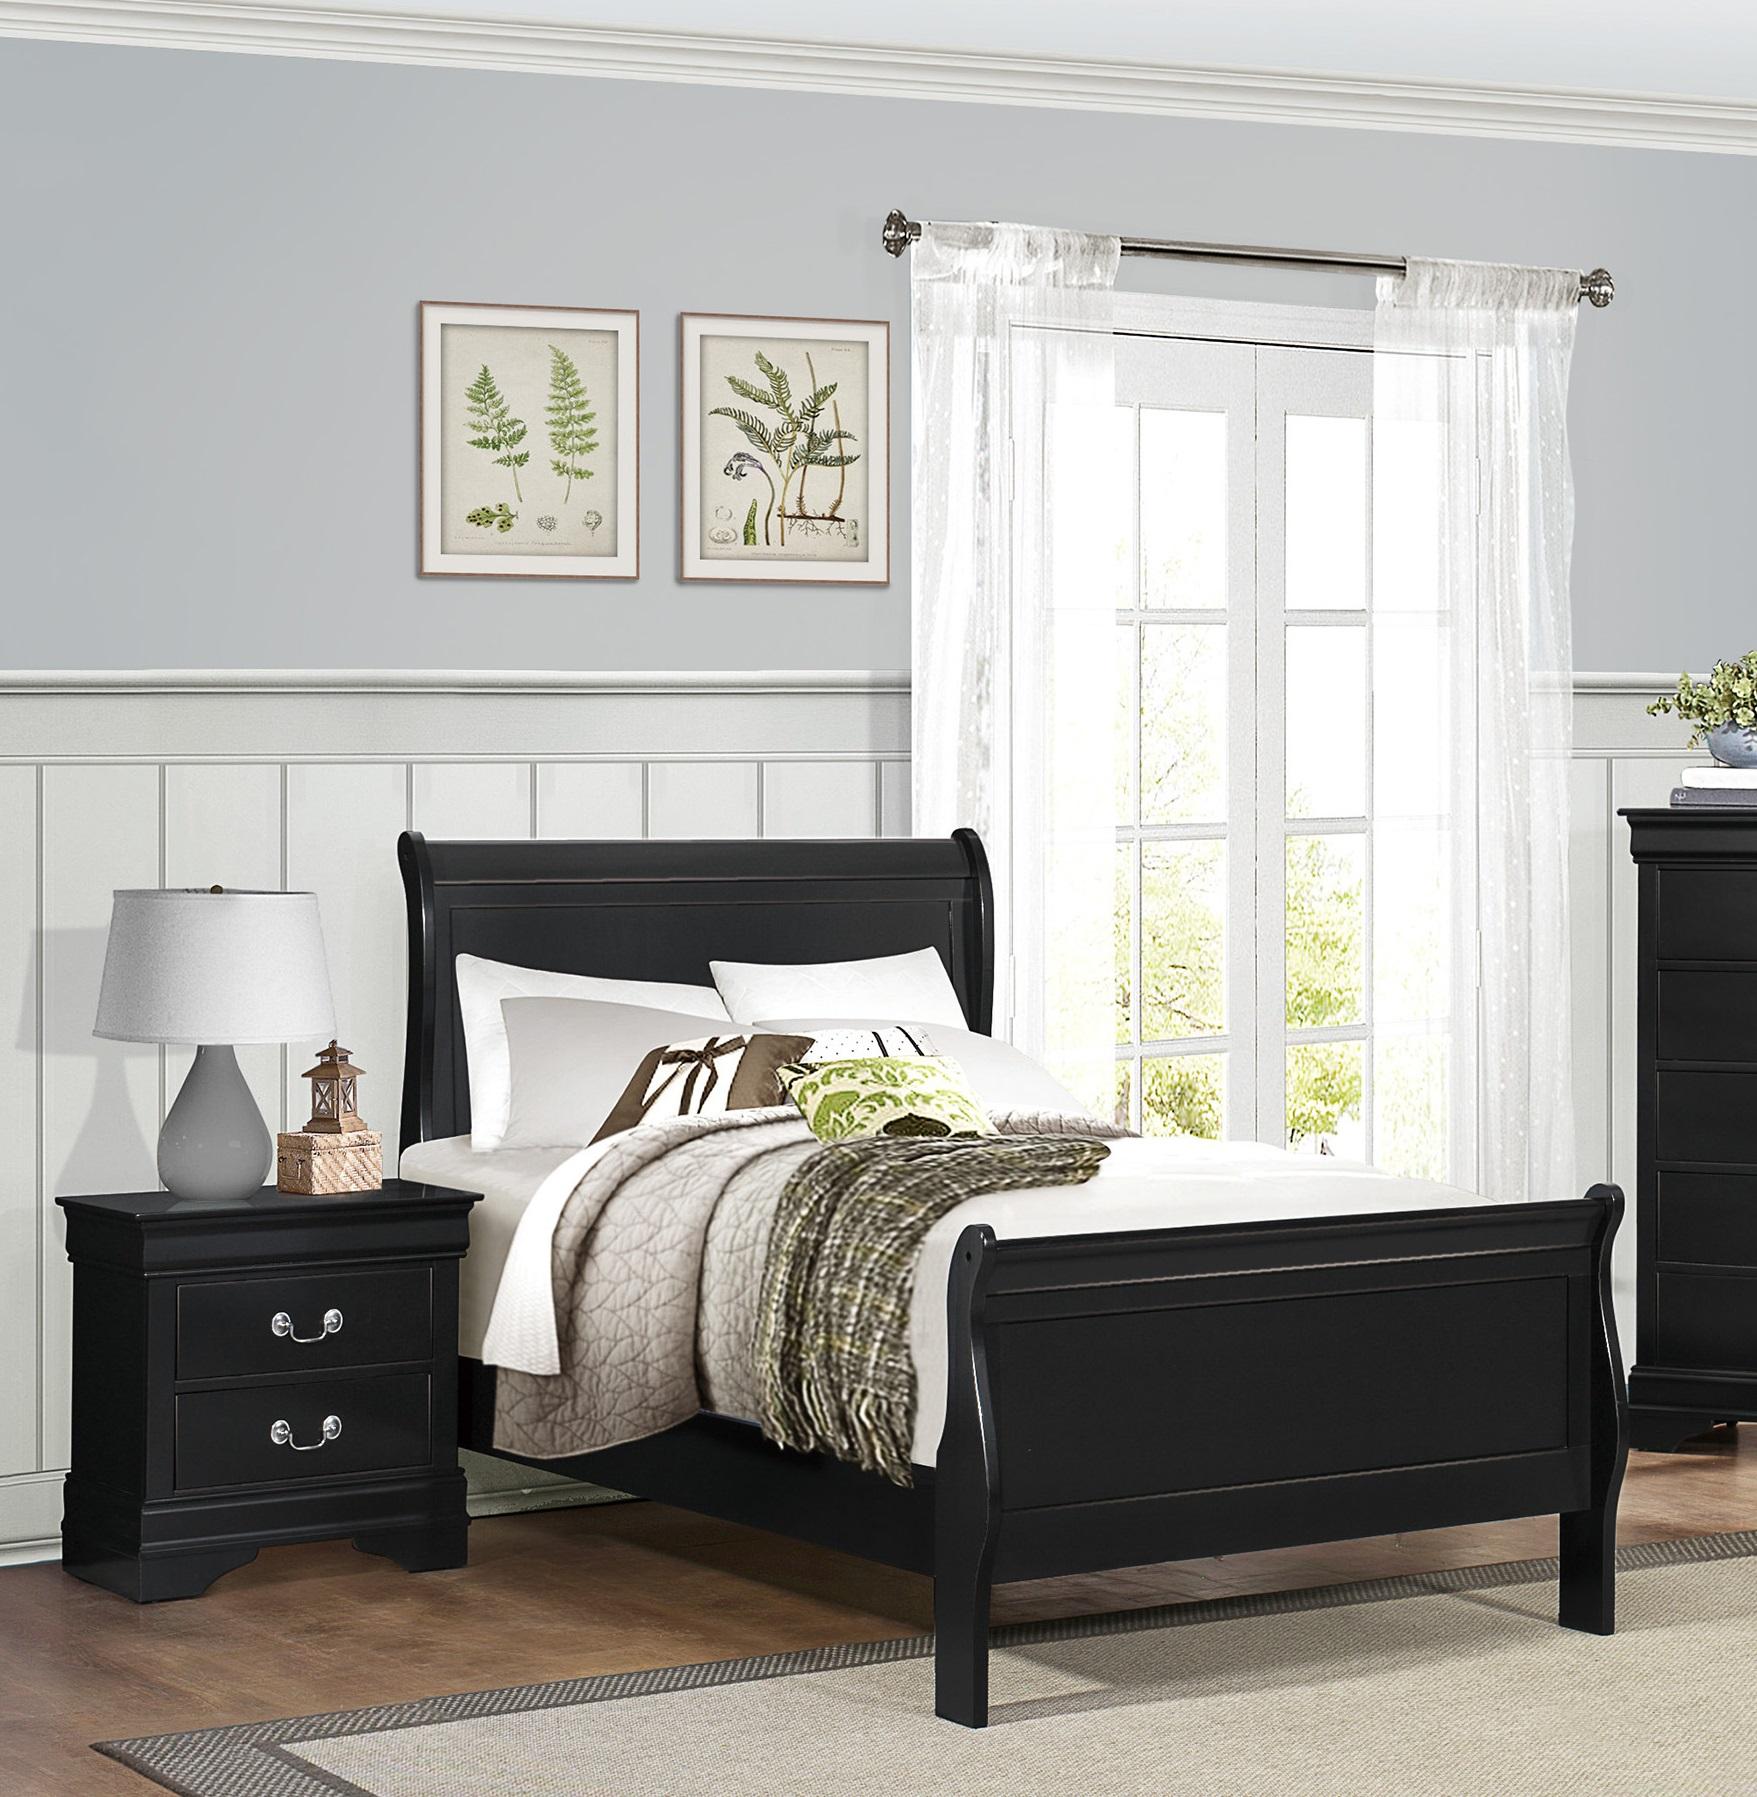 Traditional Bedroom Set 2147TBK-13PC Mayville 2147TBK-1-3PC in Black 